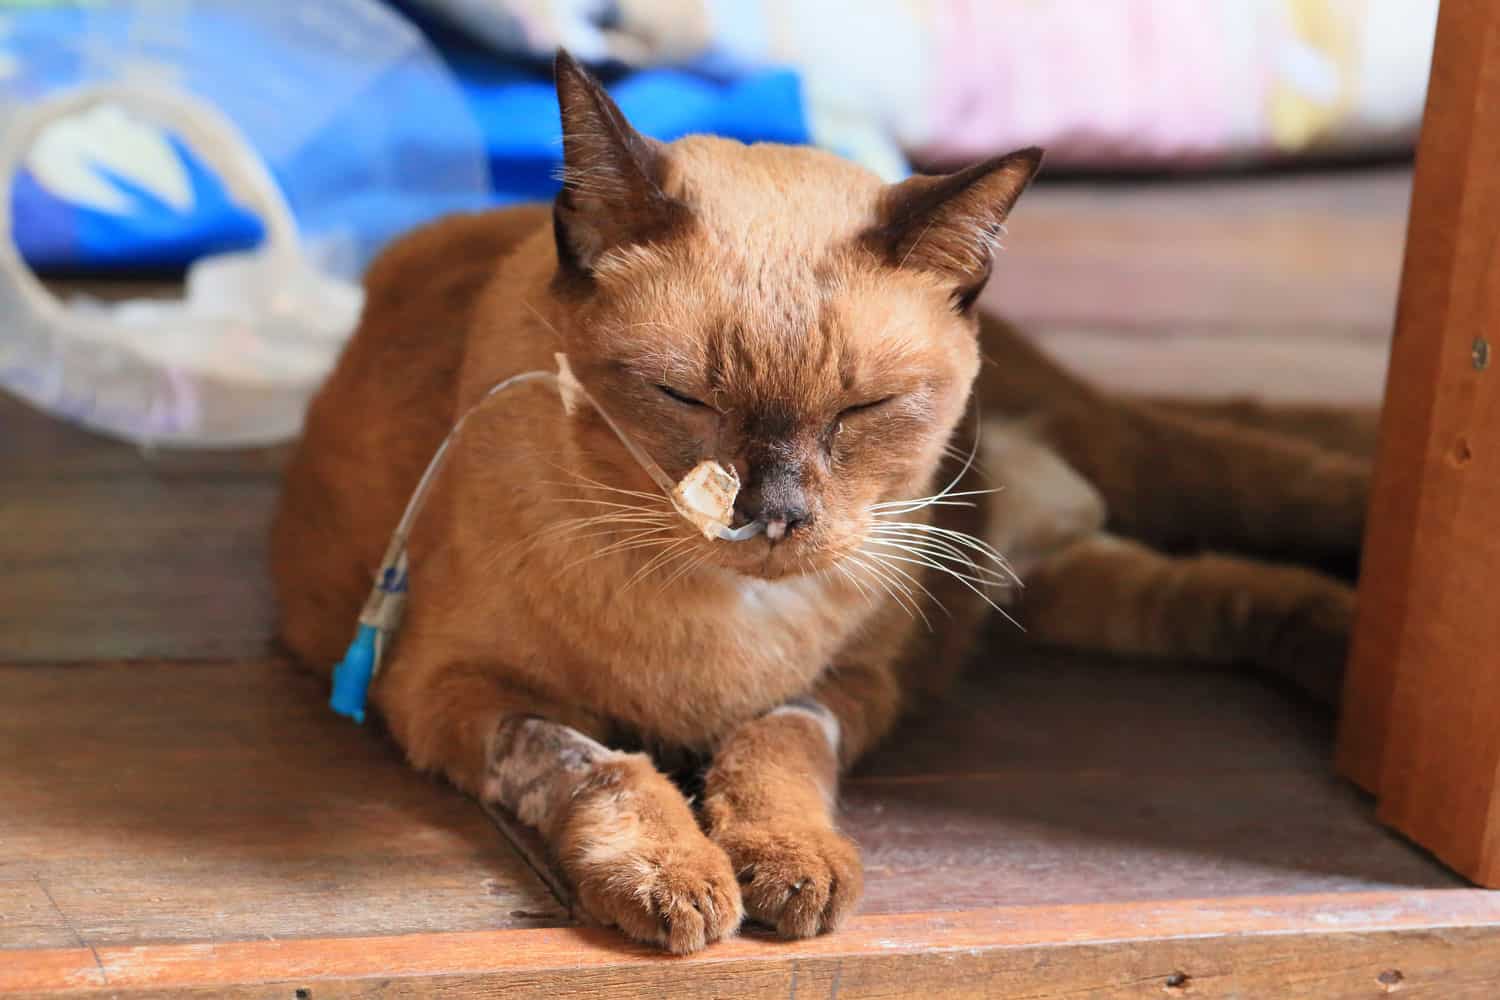 an elderly Siamese cat, visibly unwell, has a feeding tube extending from its nose to its stomach for nourishment, while a collar is visible in the background.